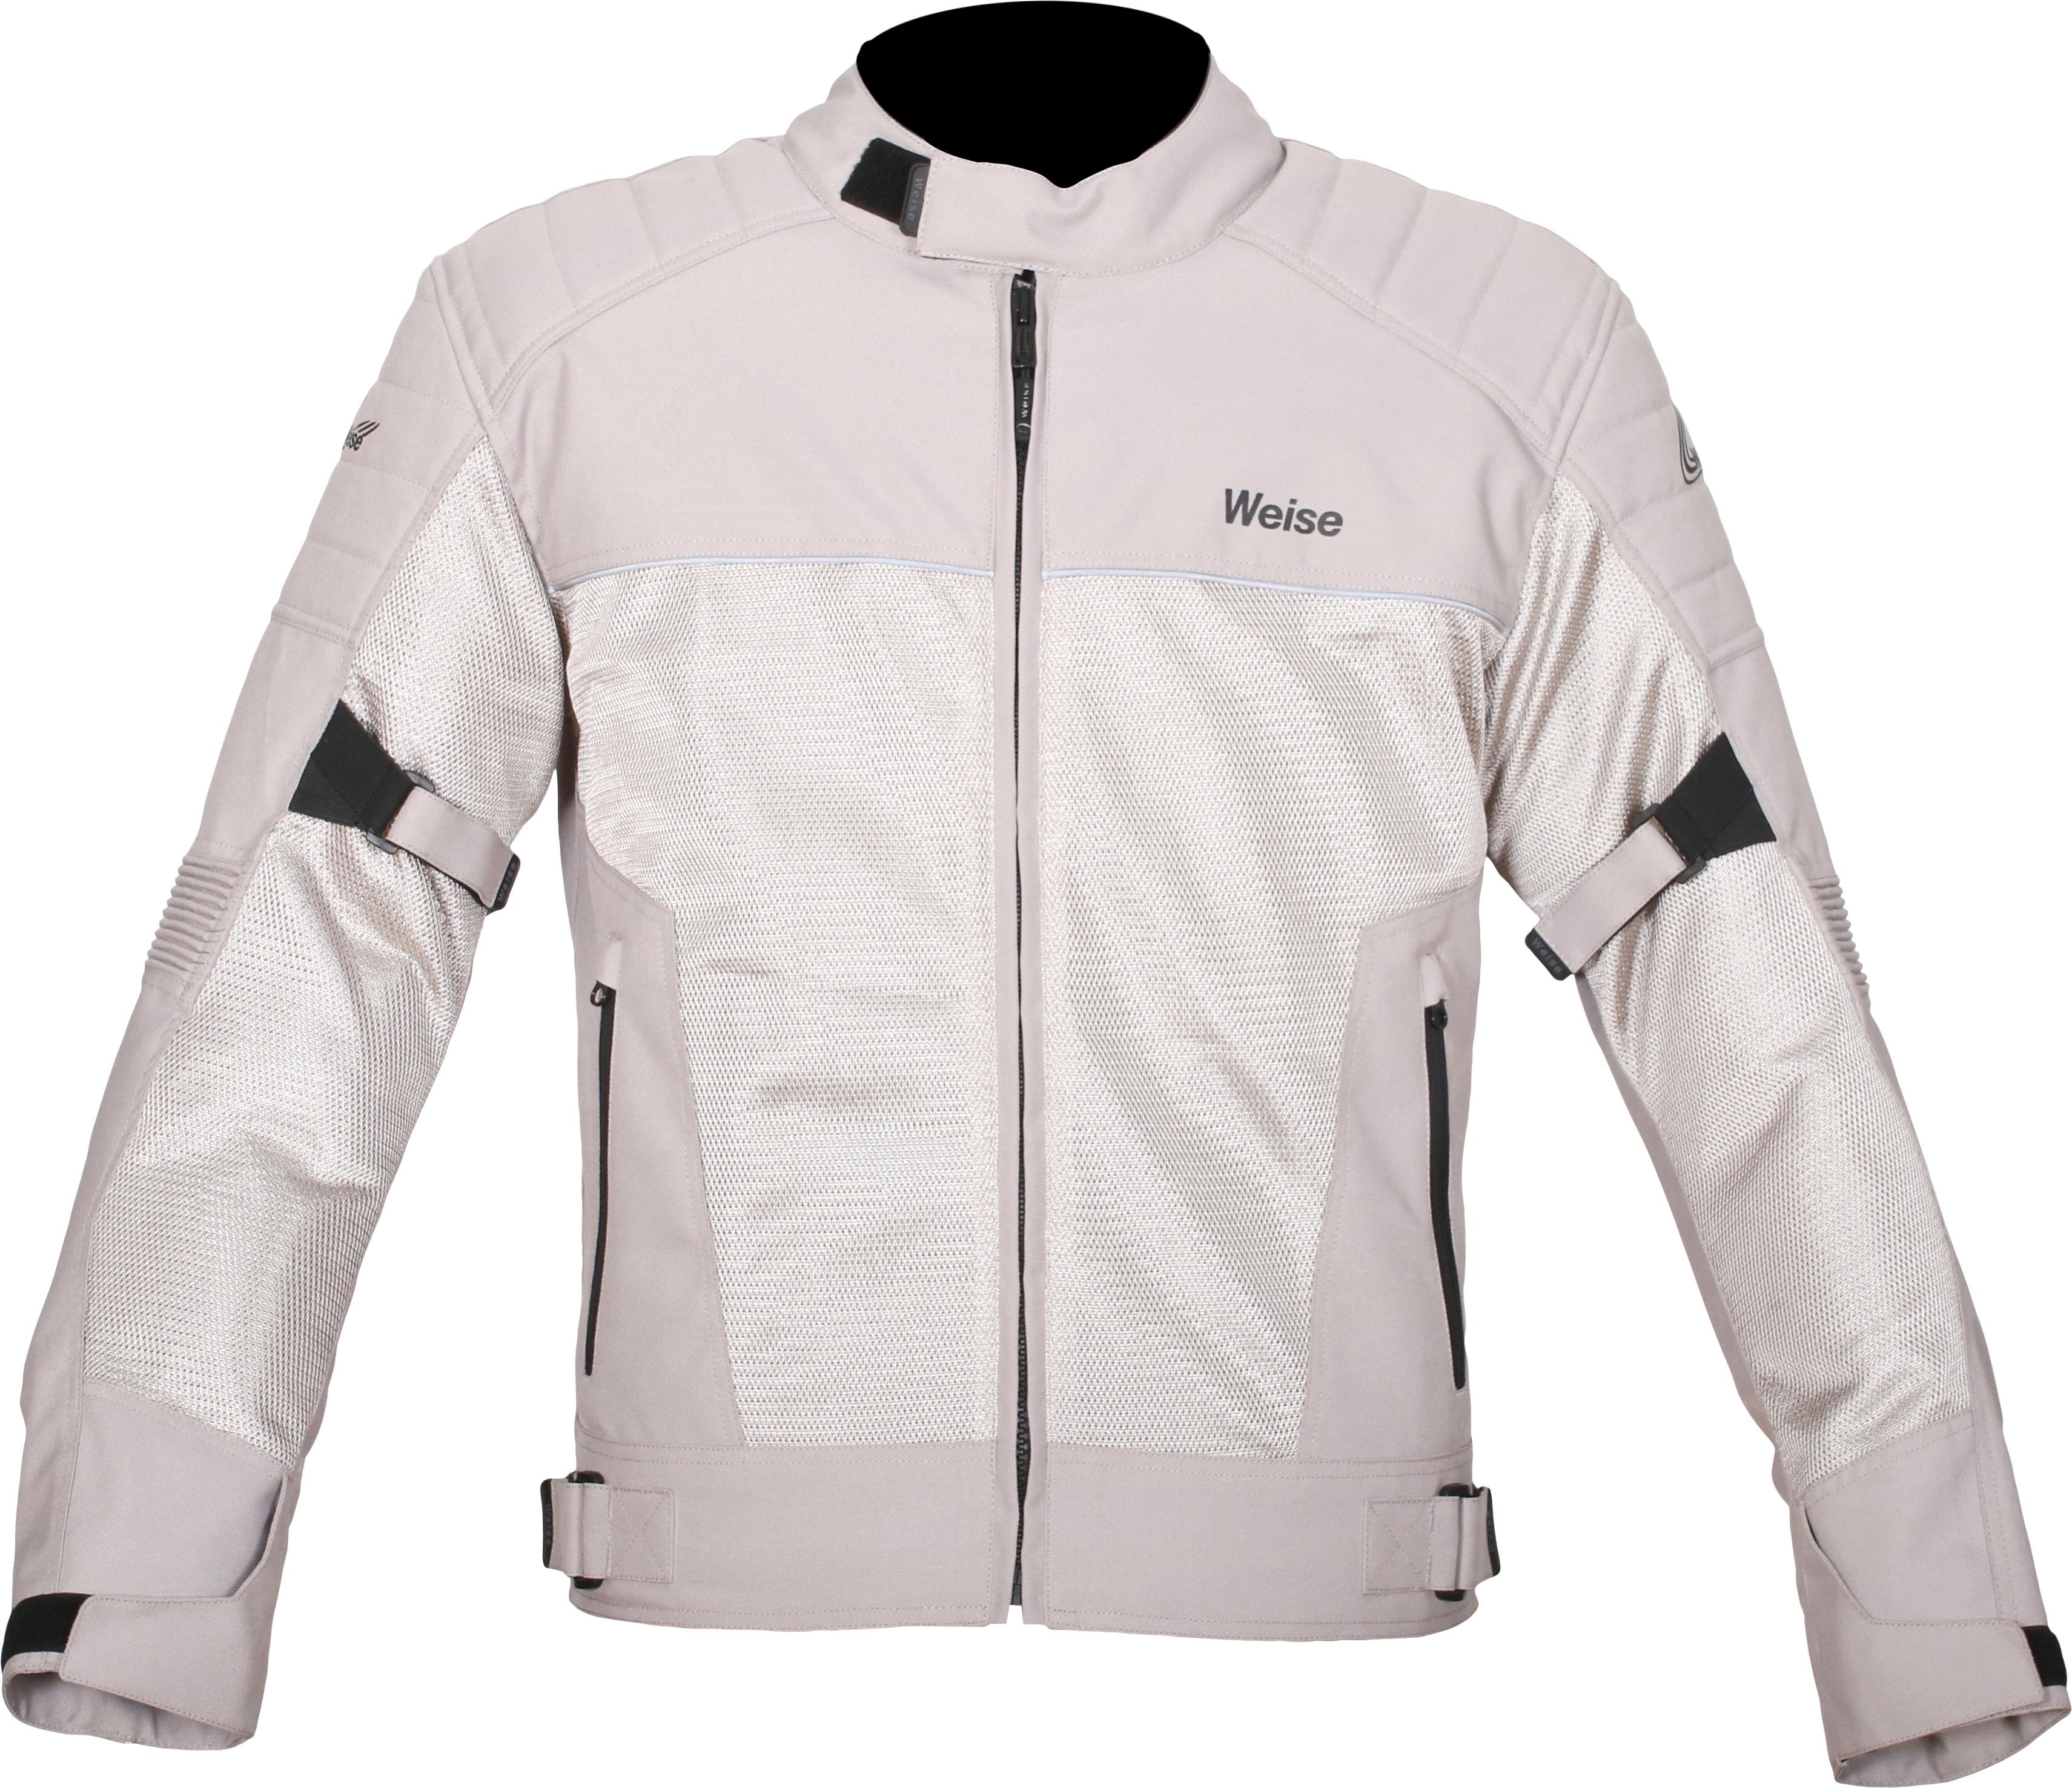 Weise Scout Motorcycle Jacket - Stone, Xl